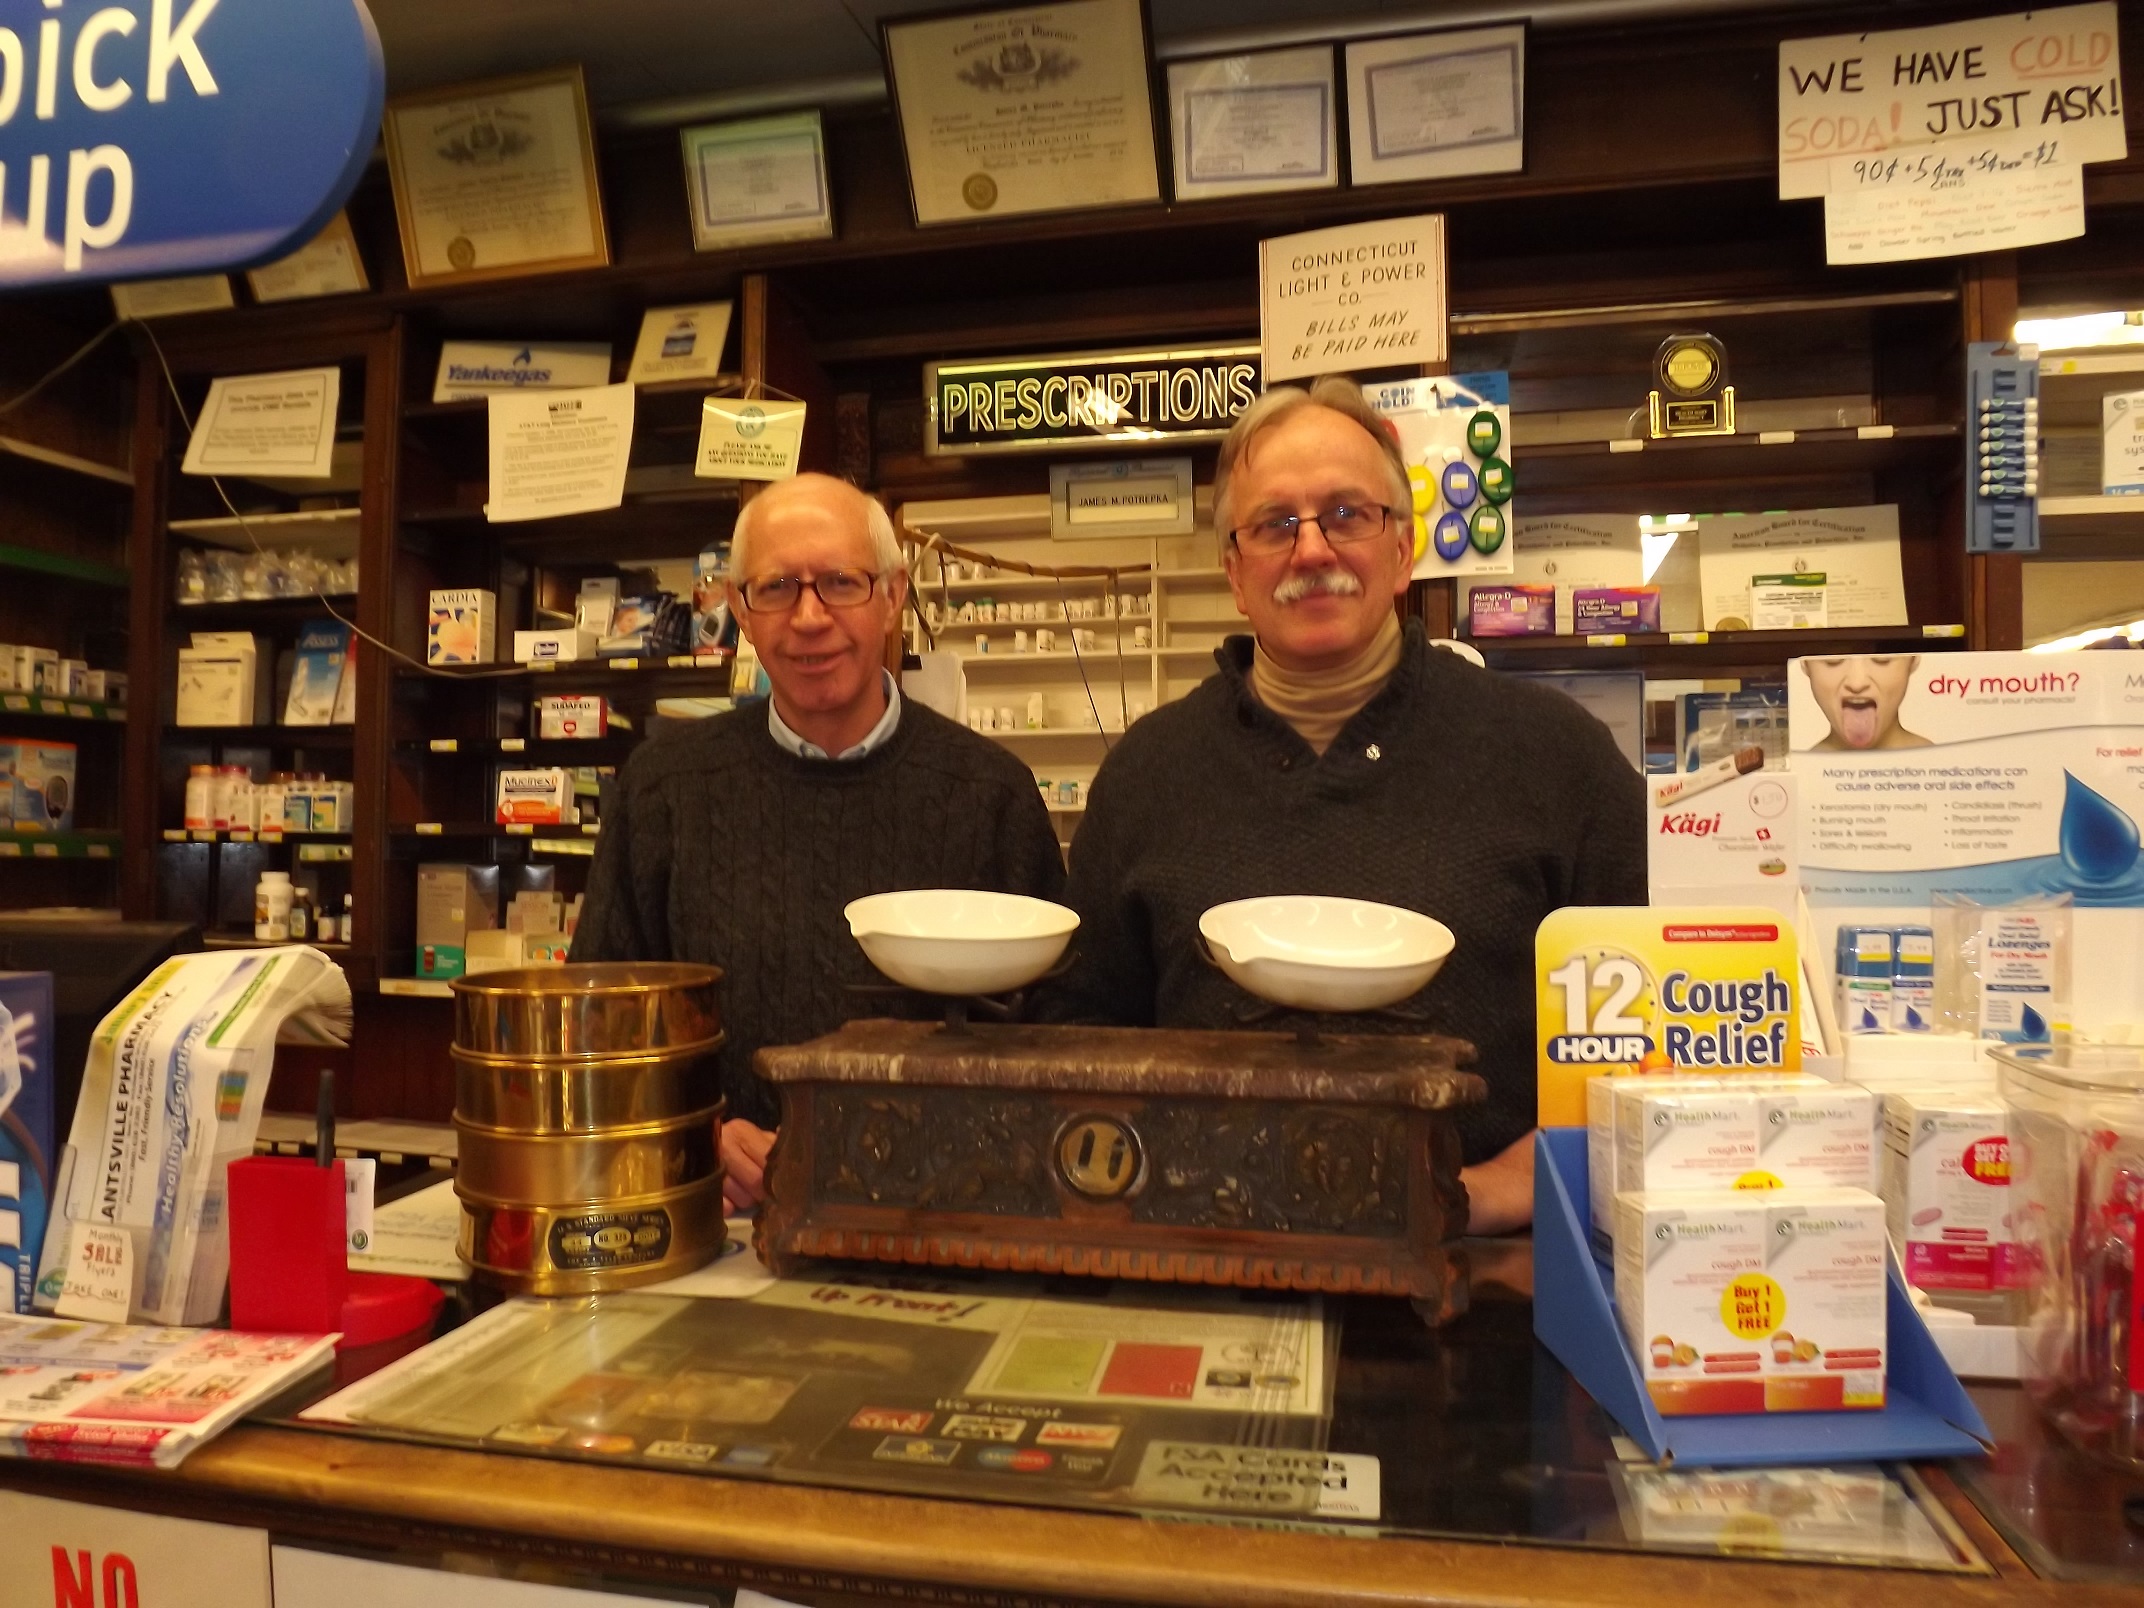 Cousins James Potrepka, left, and Chester Potrepka Jr., co-owners of Plantsville Pharmacy, show an antique balance weighing device that their fathers used when the pharmacy was established in April 1946. Now one of the oldest commercial businesses in downtown Plantsville, it will celebrate its 70th anniversary in 2016. 